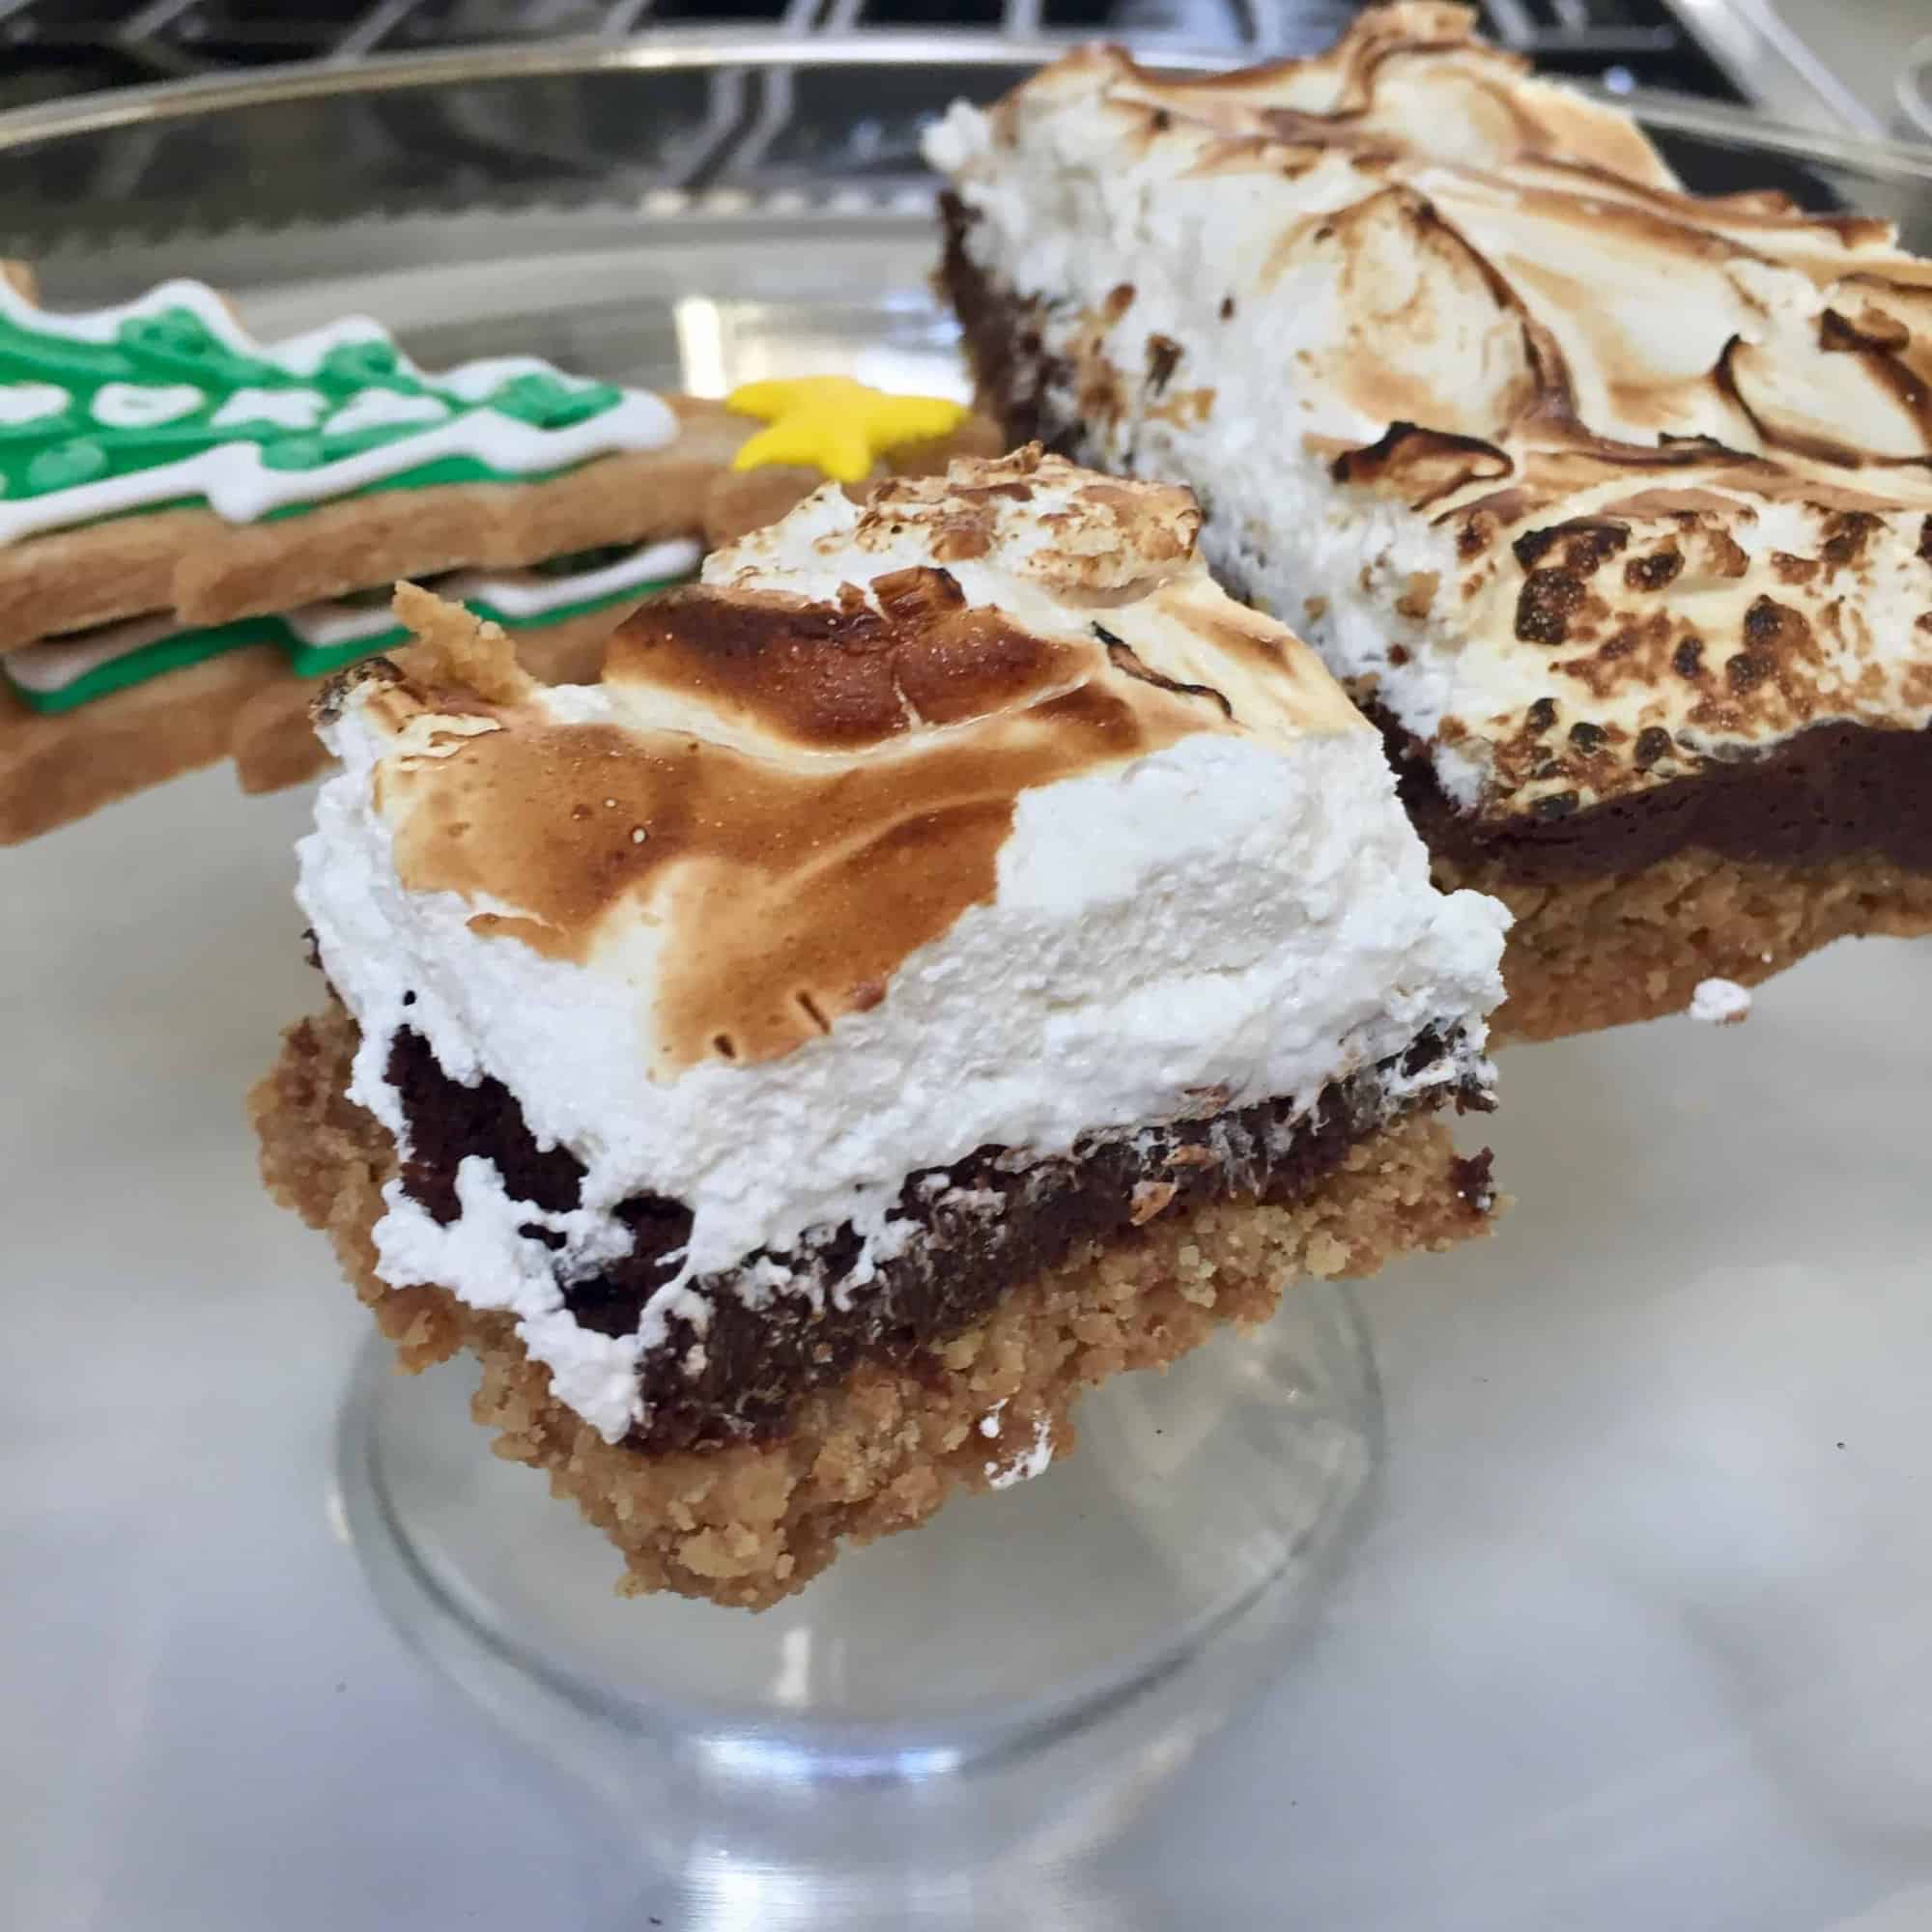 S’mores Bars with Marshmallow Meringue from Cheryl and Griffith Day of Back in the Day Bakery, Savannah, GA.